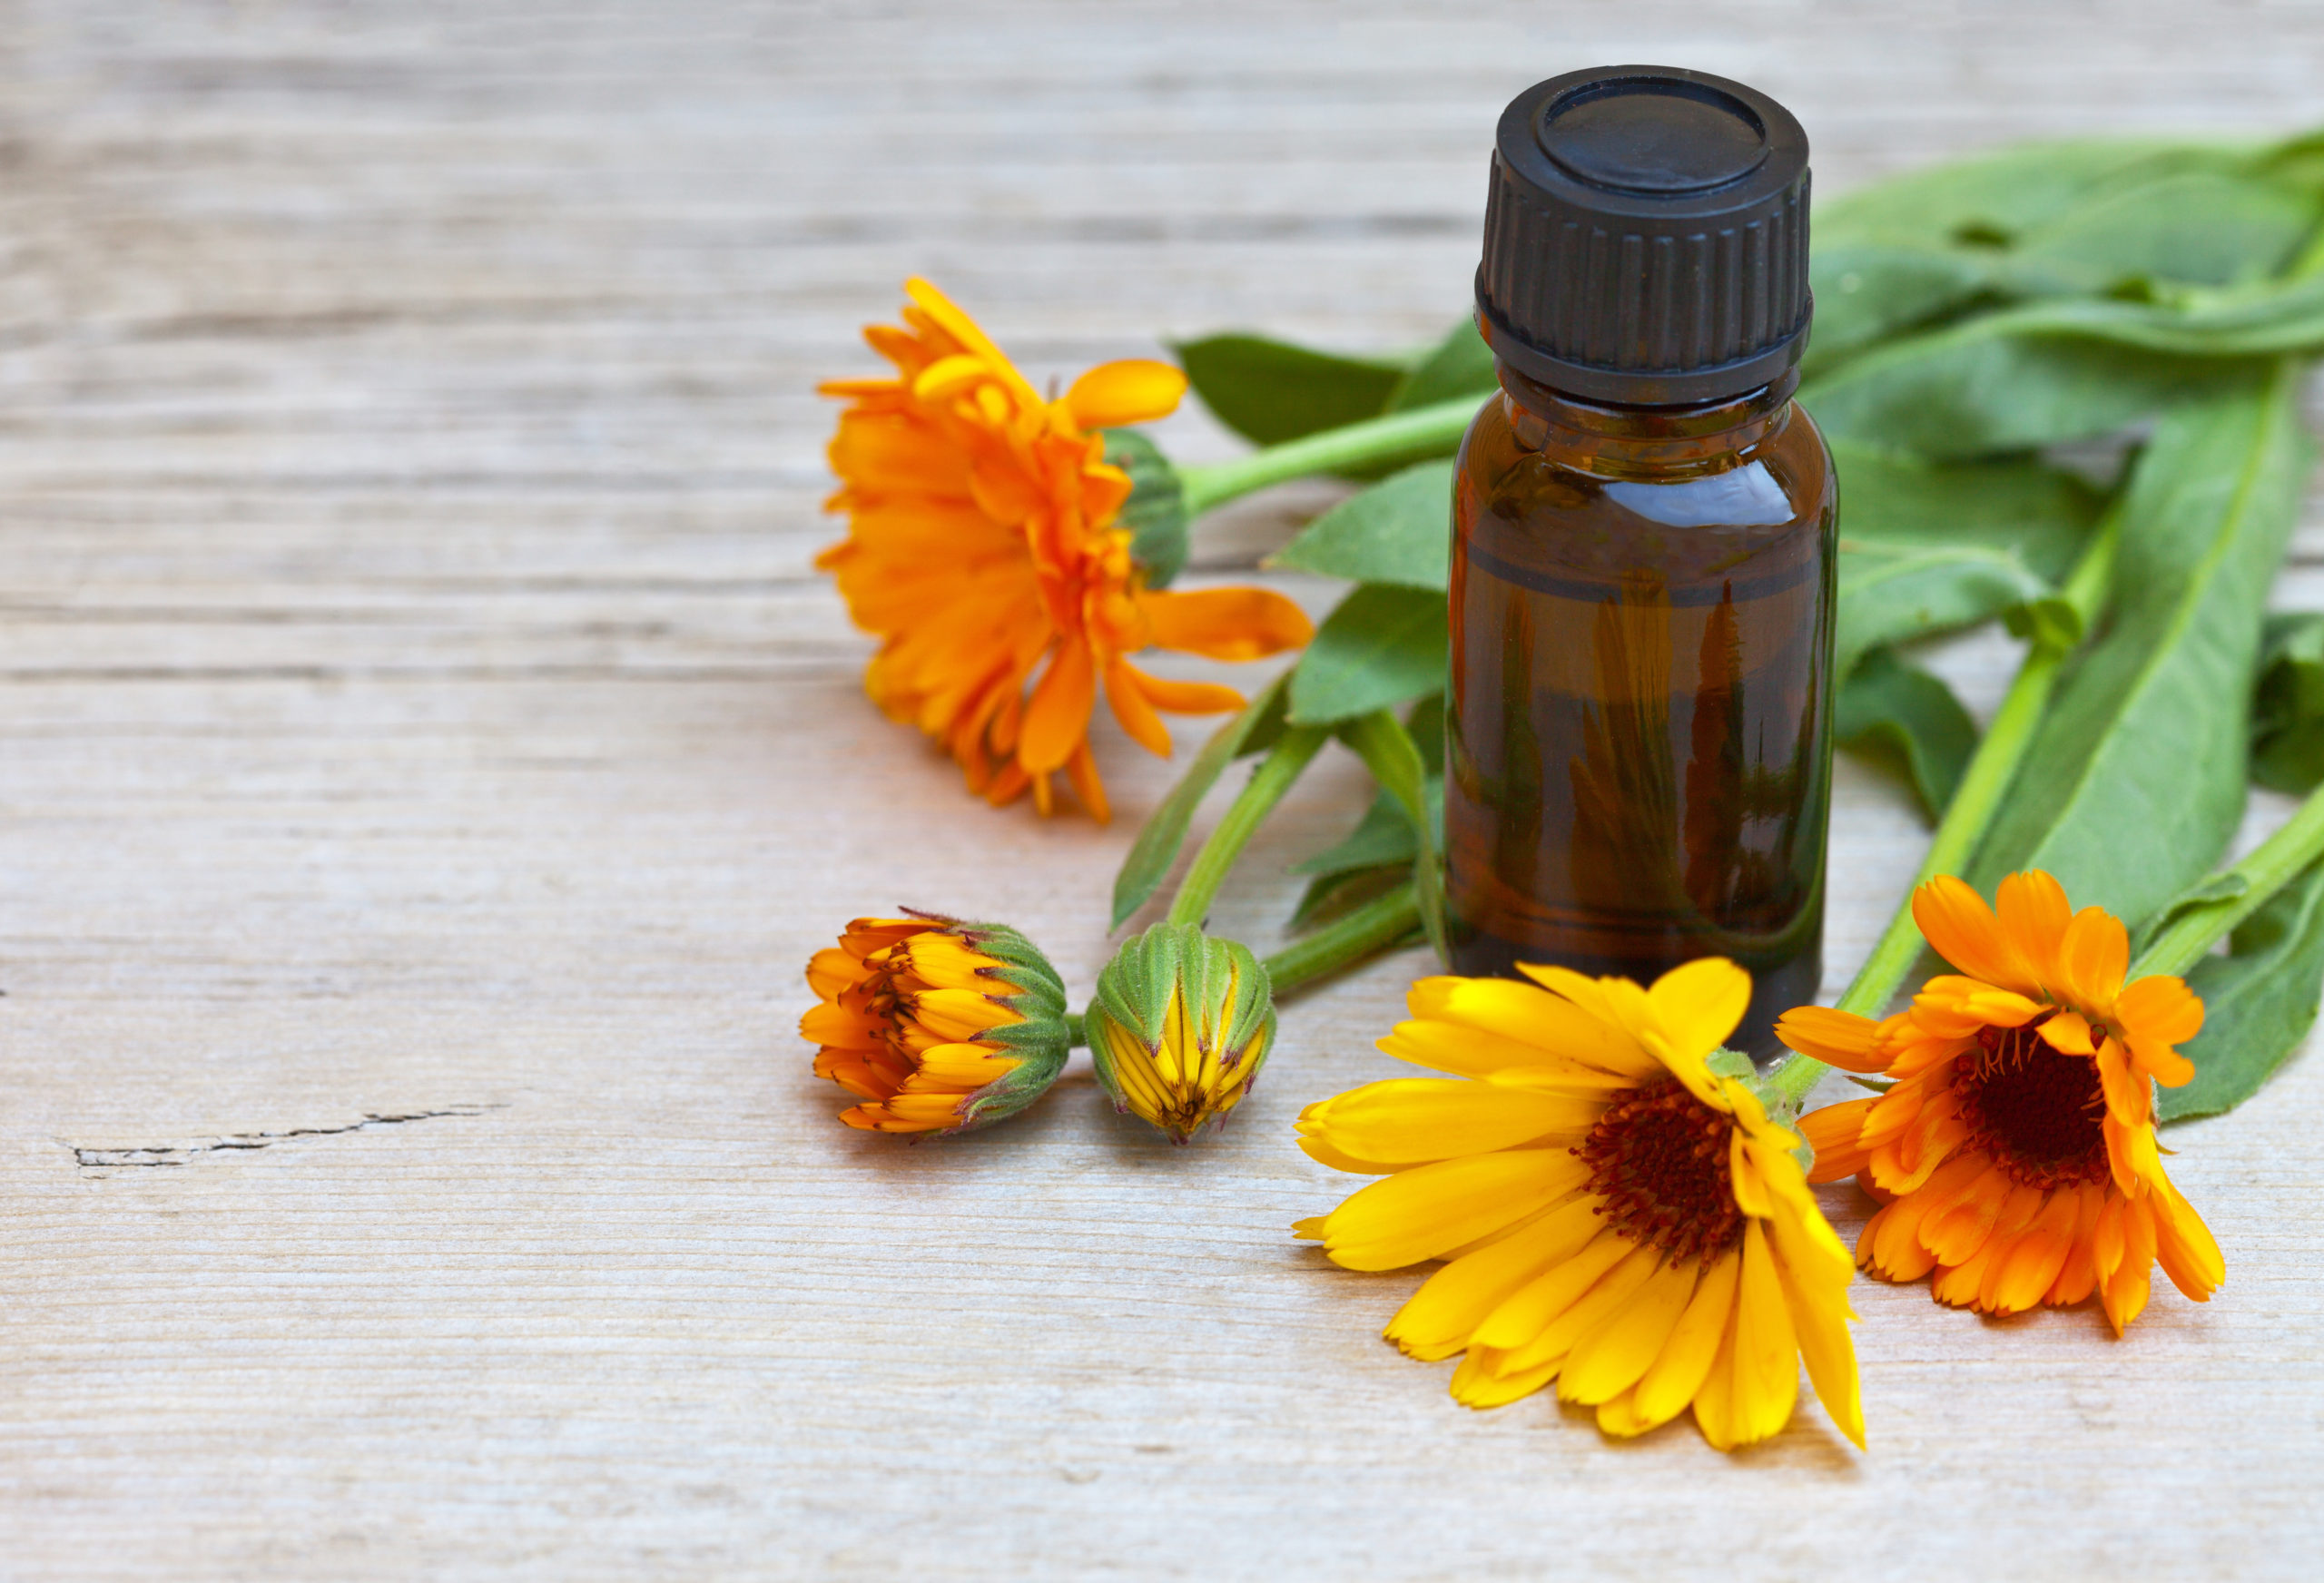 Healing bright calendula flowers and a vial with a medicinal tincture based on a marigold plant. Place for text. Close-up view